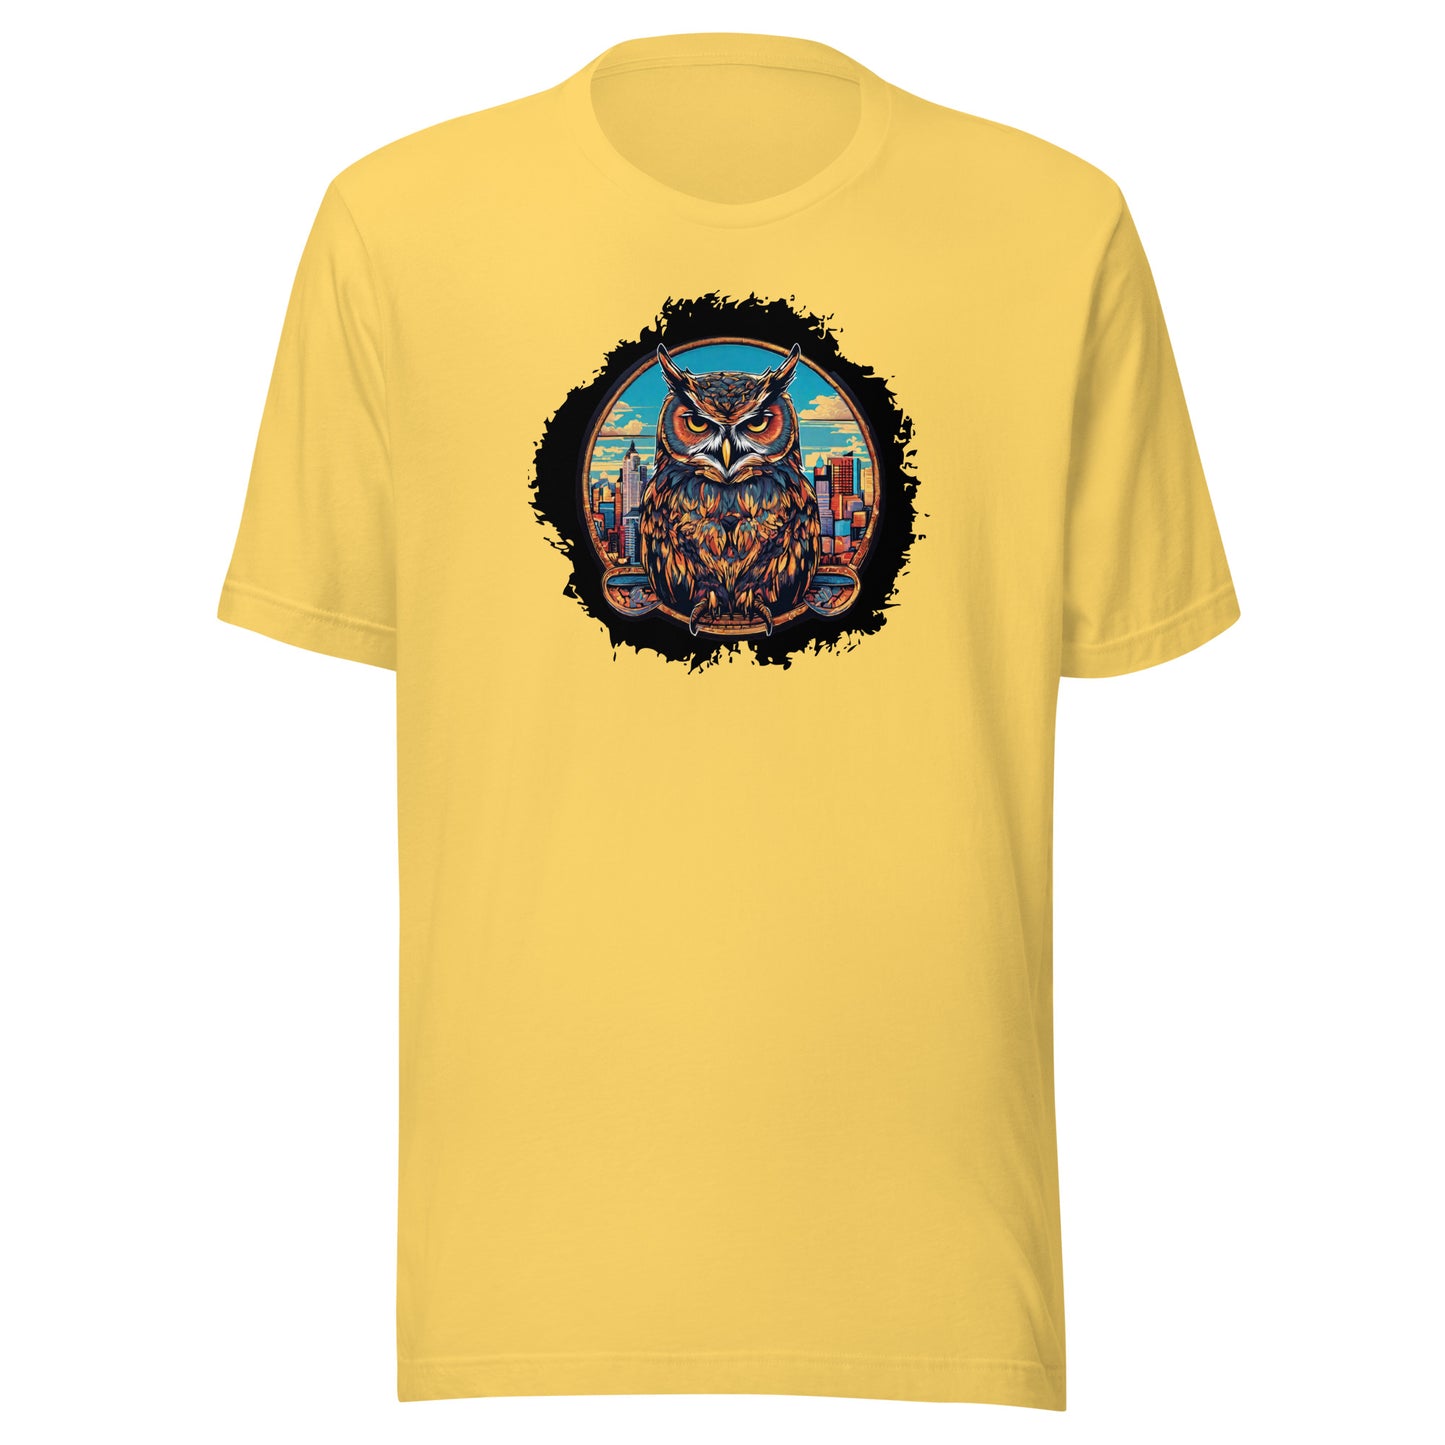 Owl in the City Emblem T-Shirt Yellow